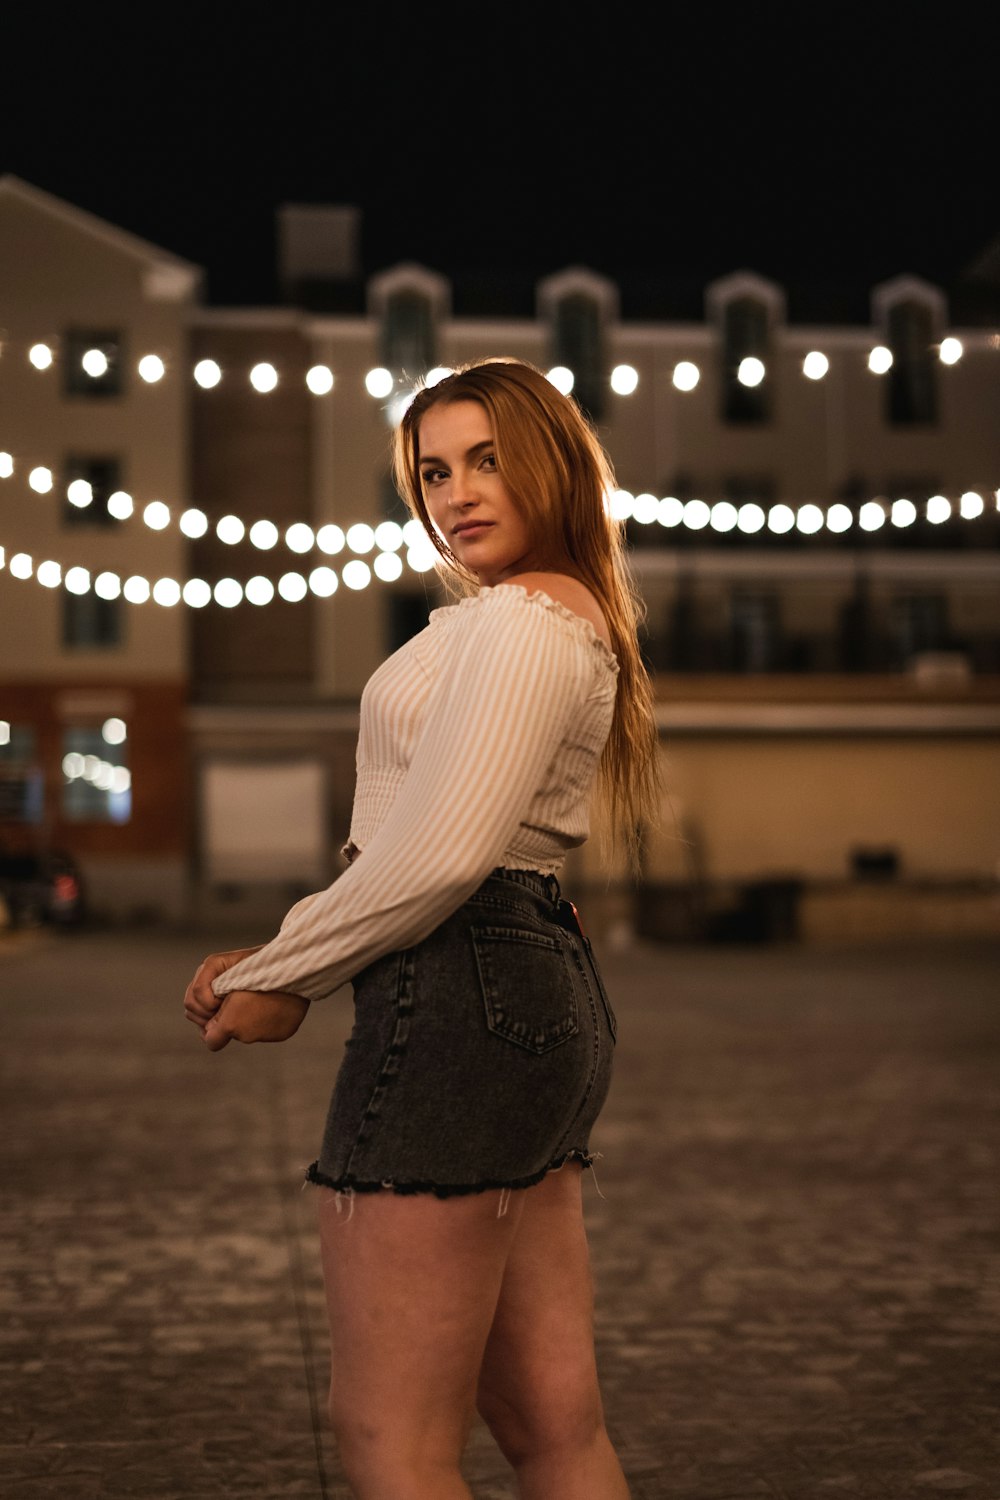 woman in white long sleeve shirt and black skirt standing on street during night time